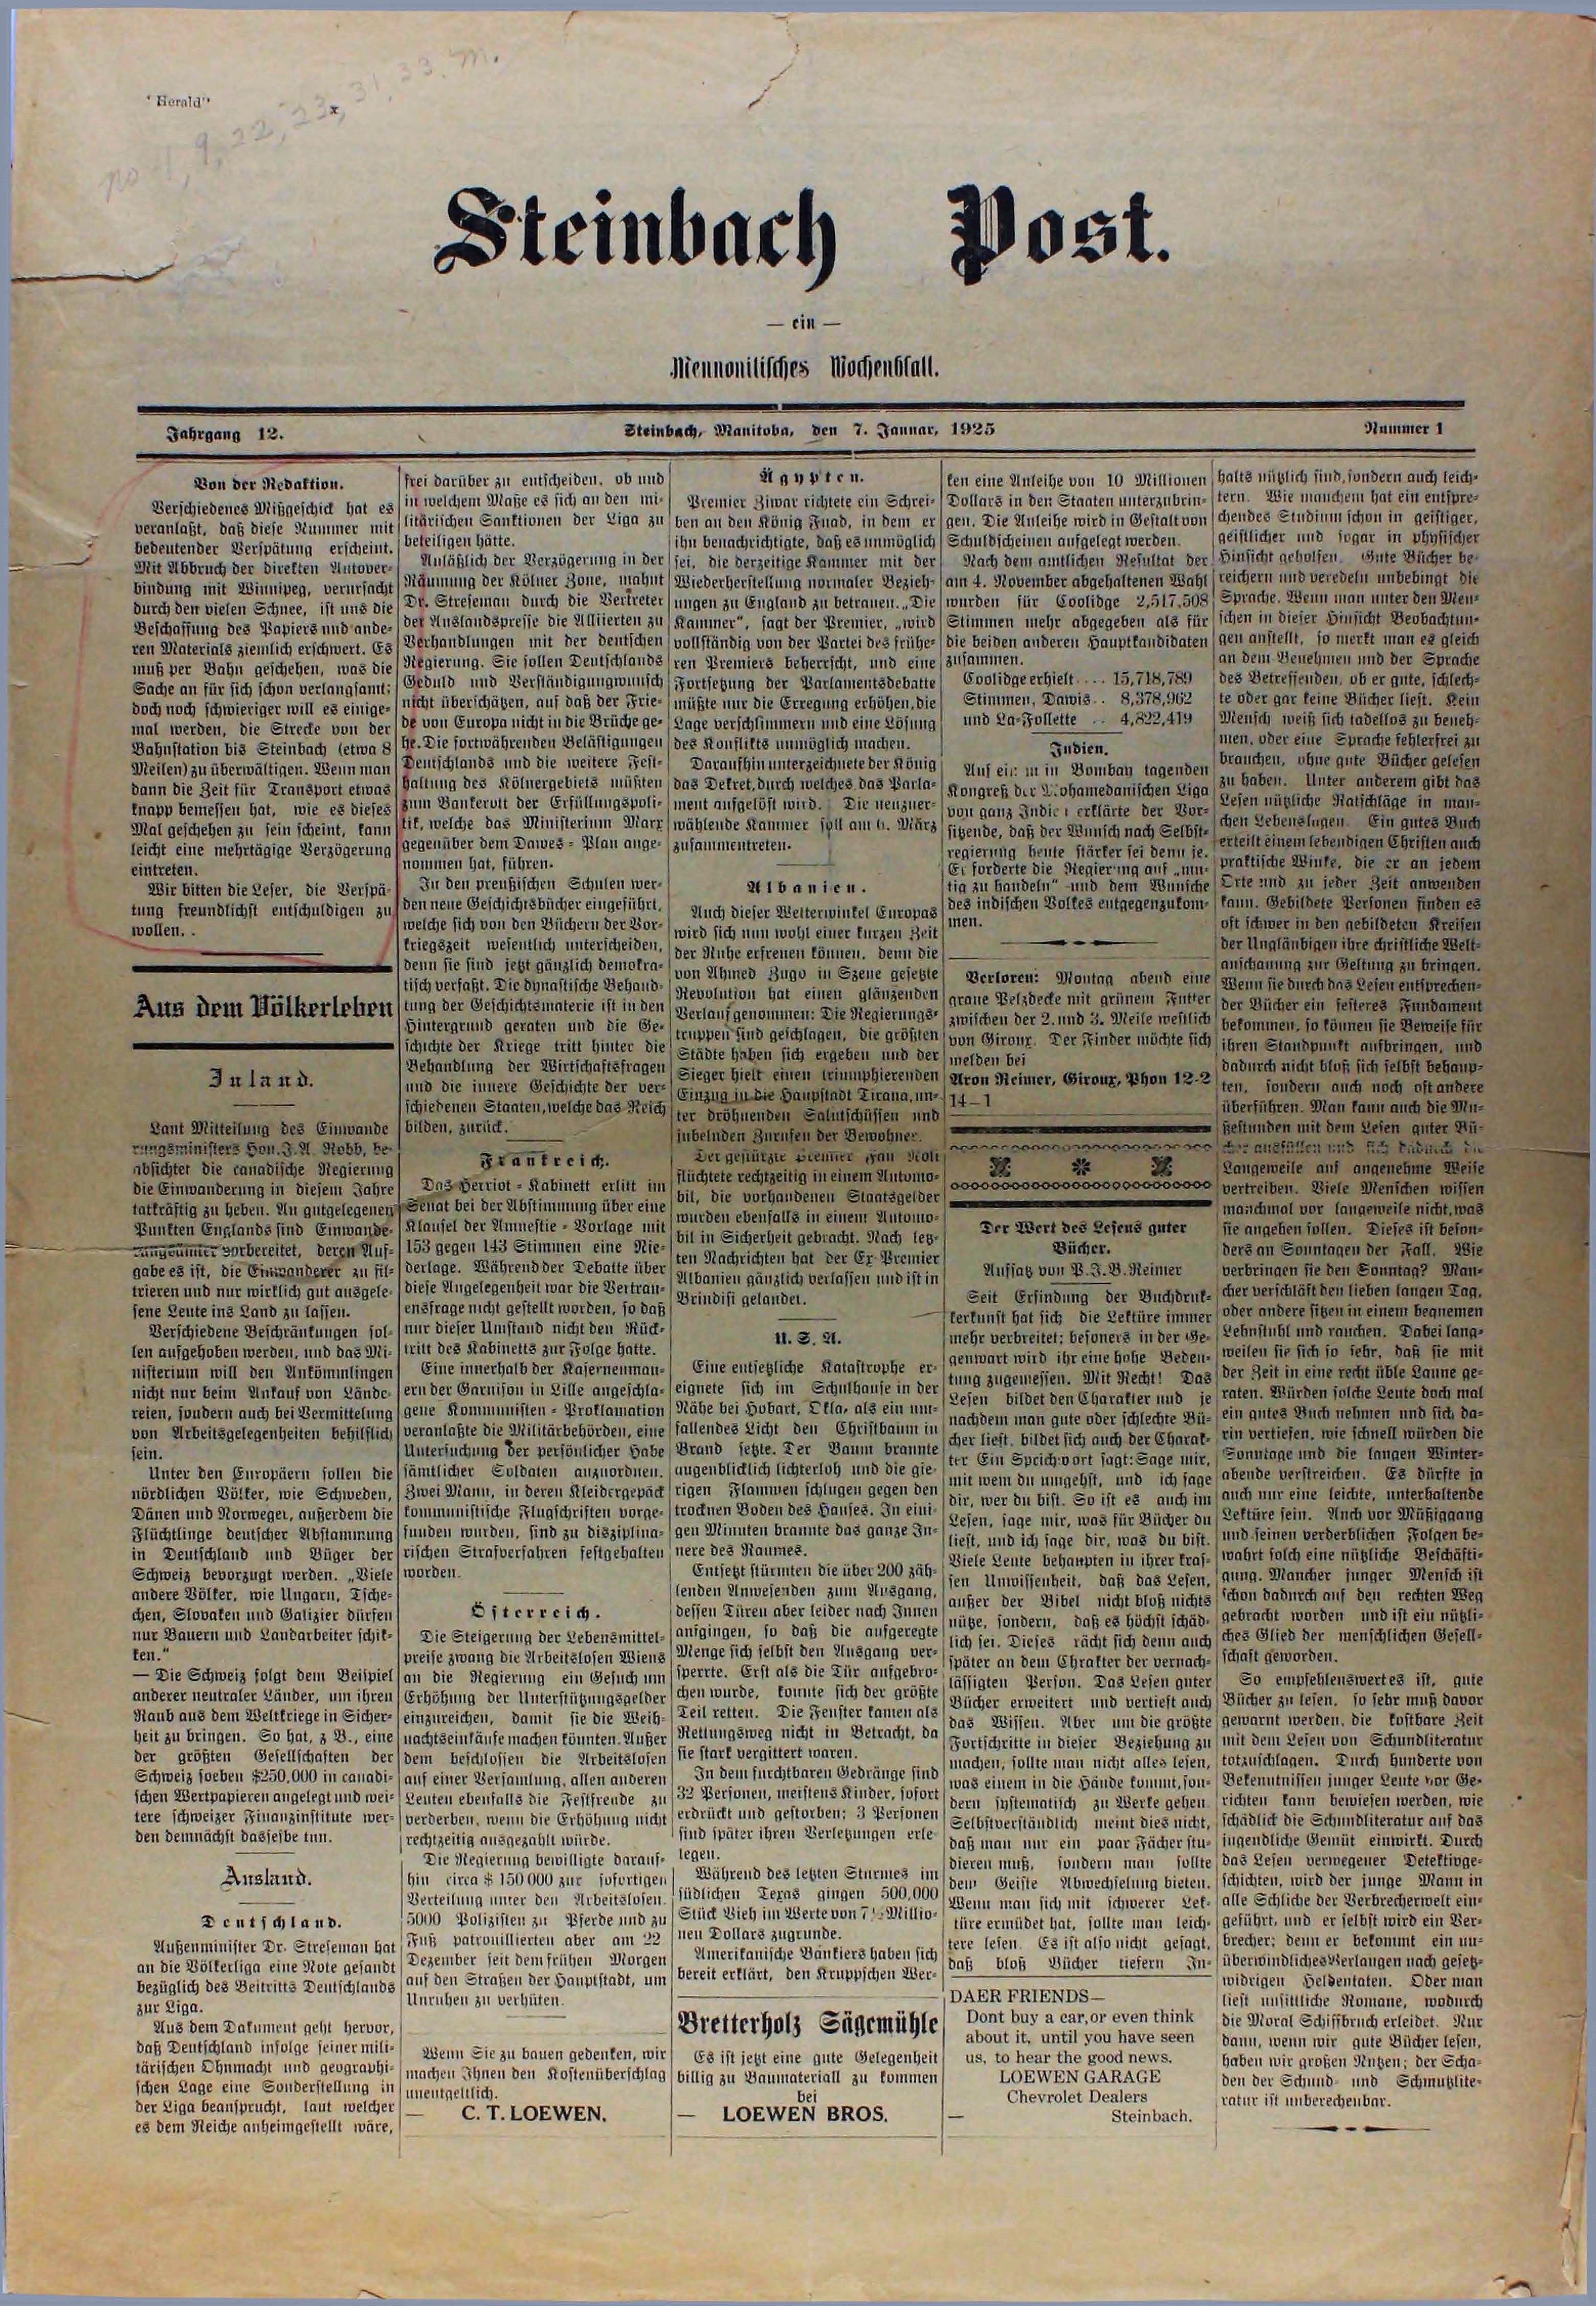 Front page of Steinbach Post volume 12 issue 1